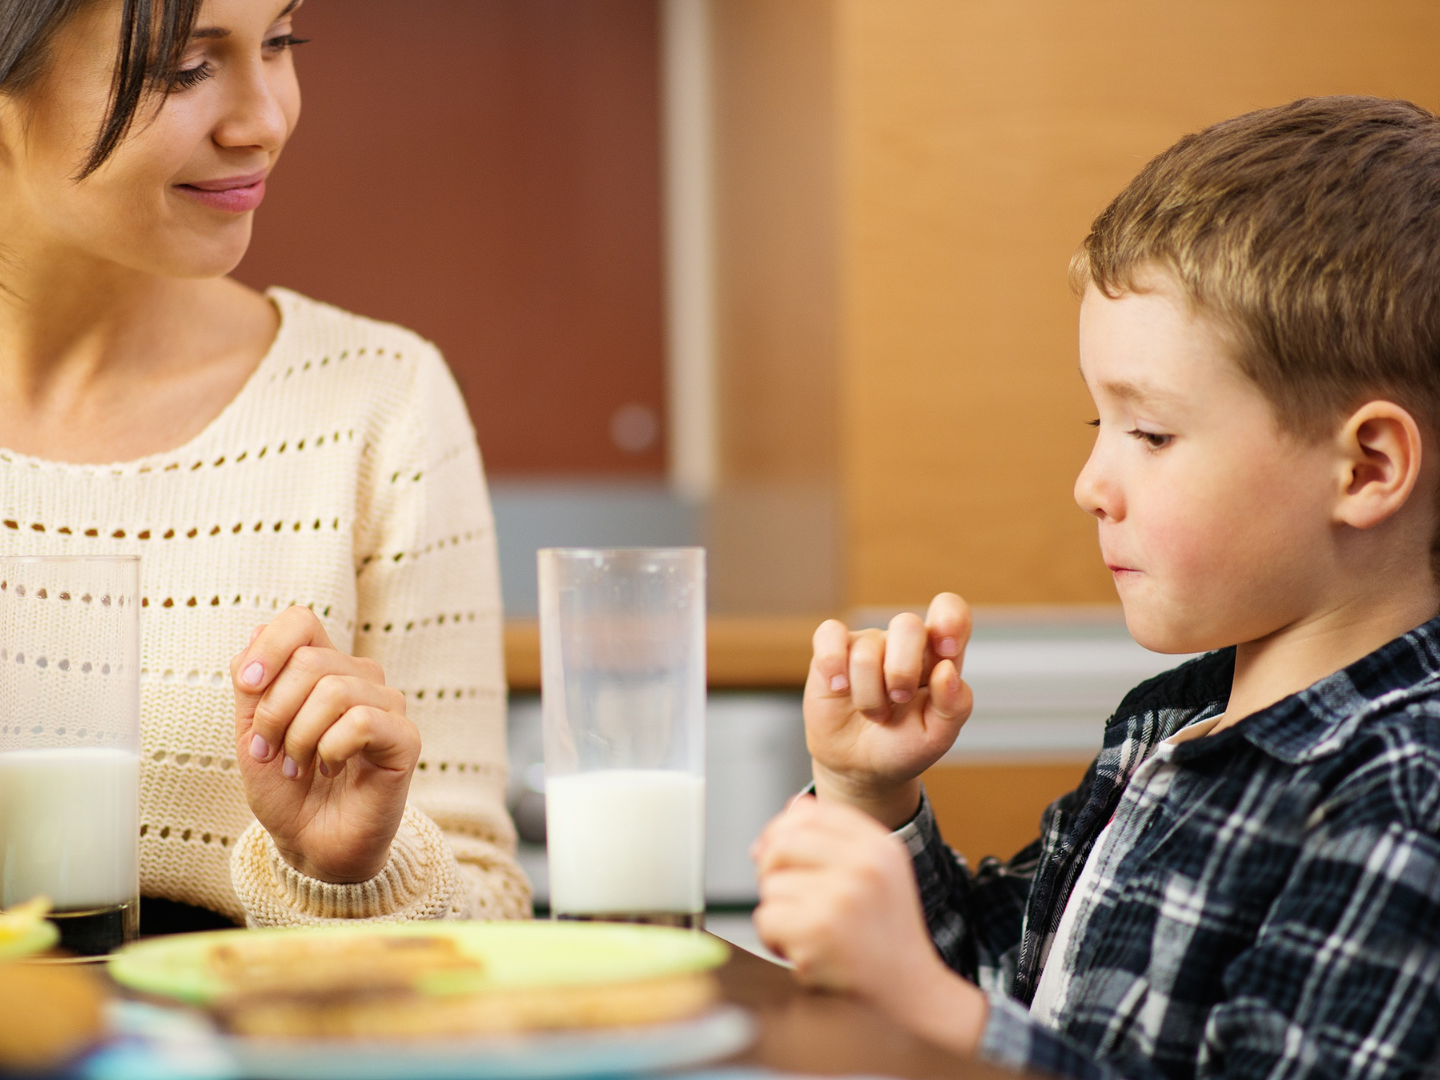 Mindful eating for Children - by Maria Lourdes A. de Vera